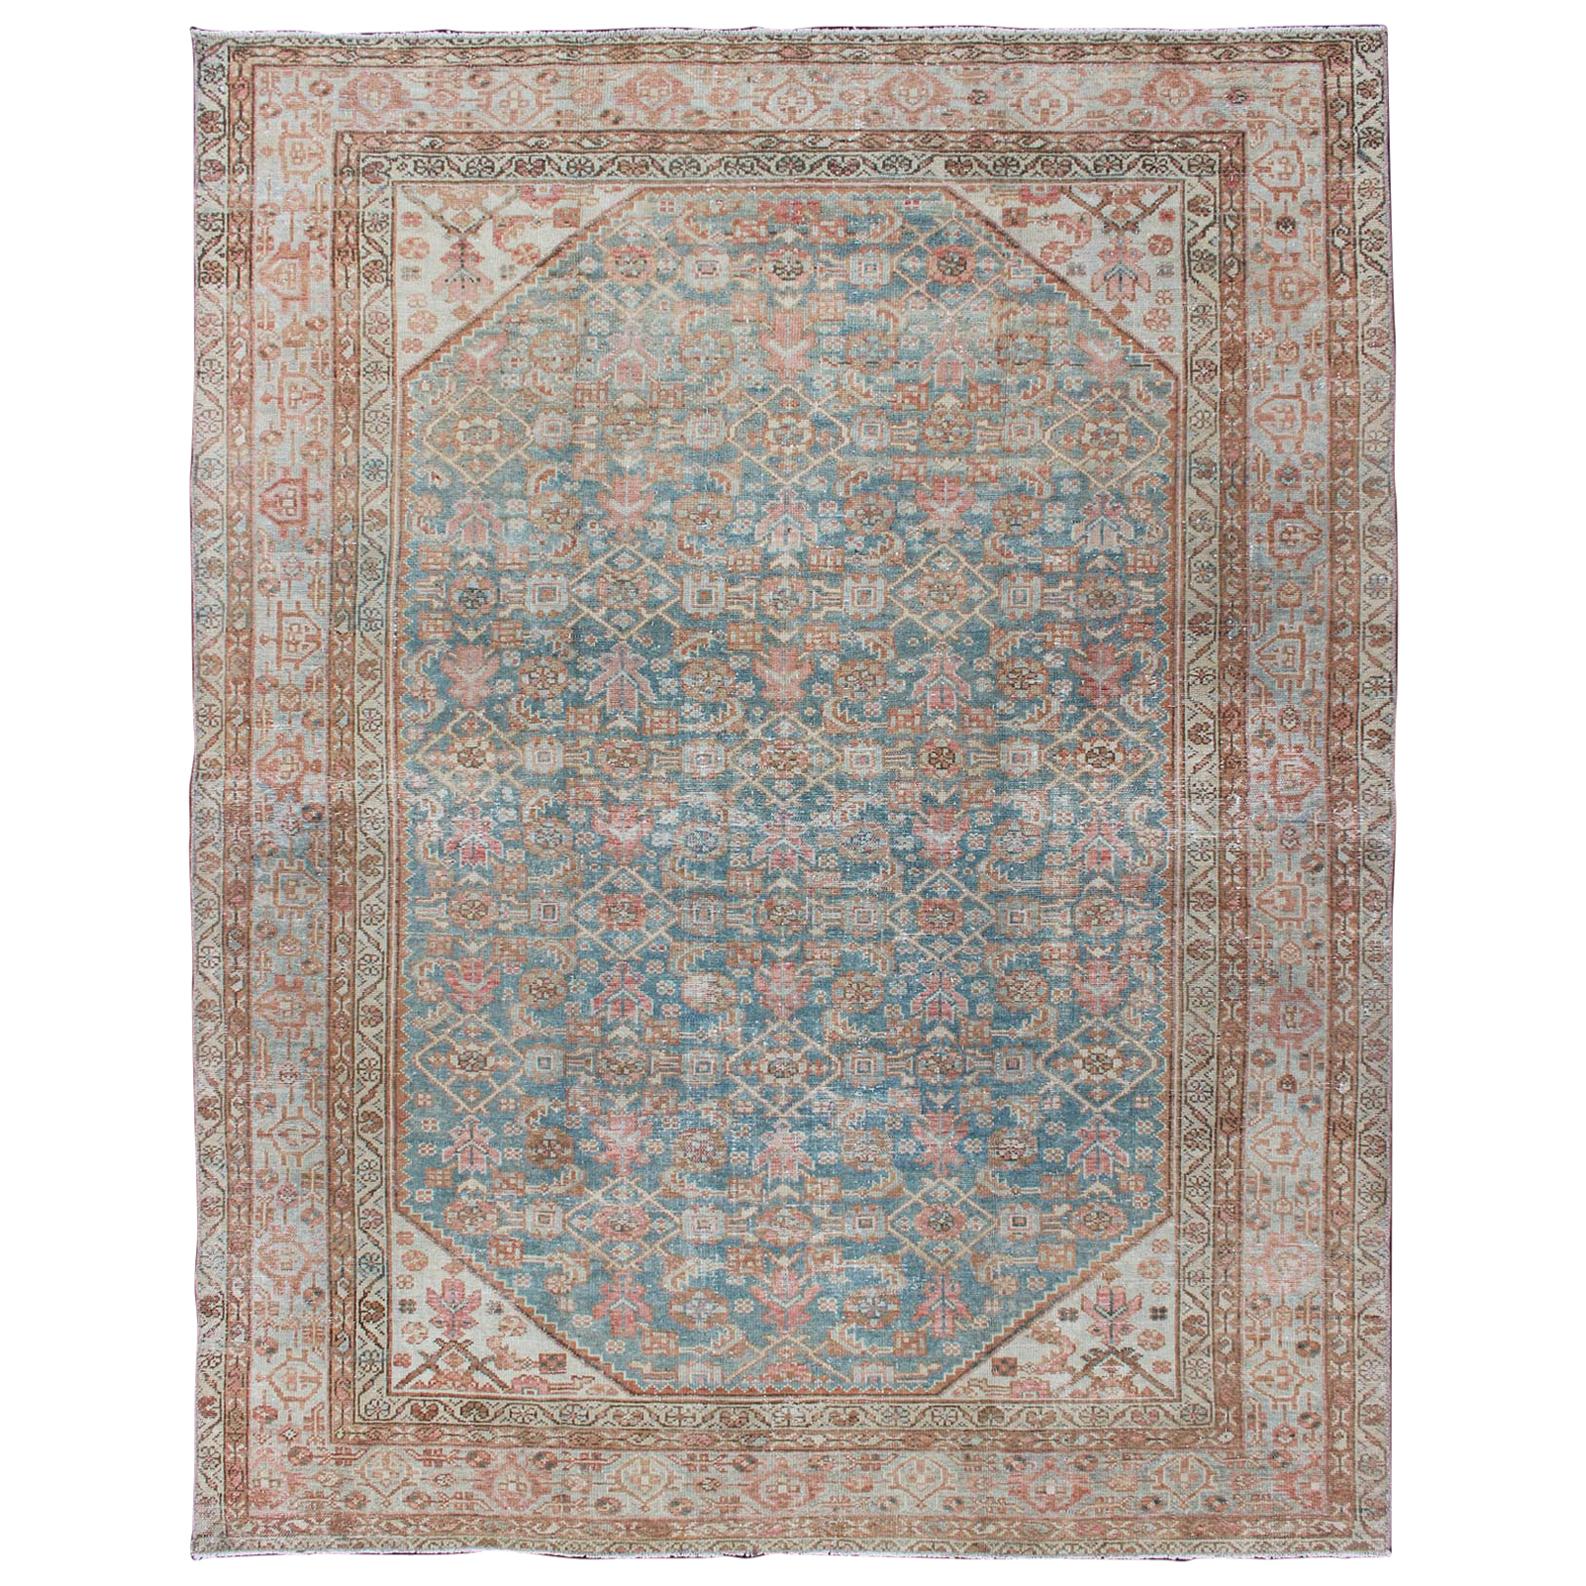 Antique Malayer Carpet with All-Over Design in Blue Gray Tones